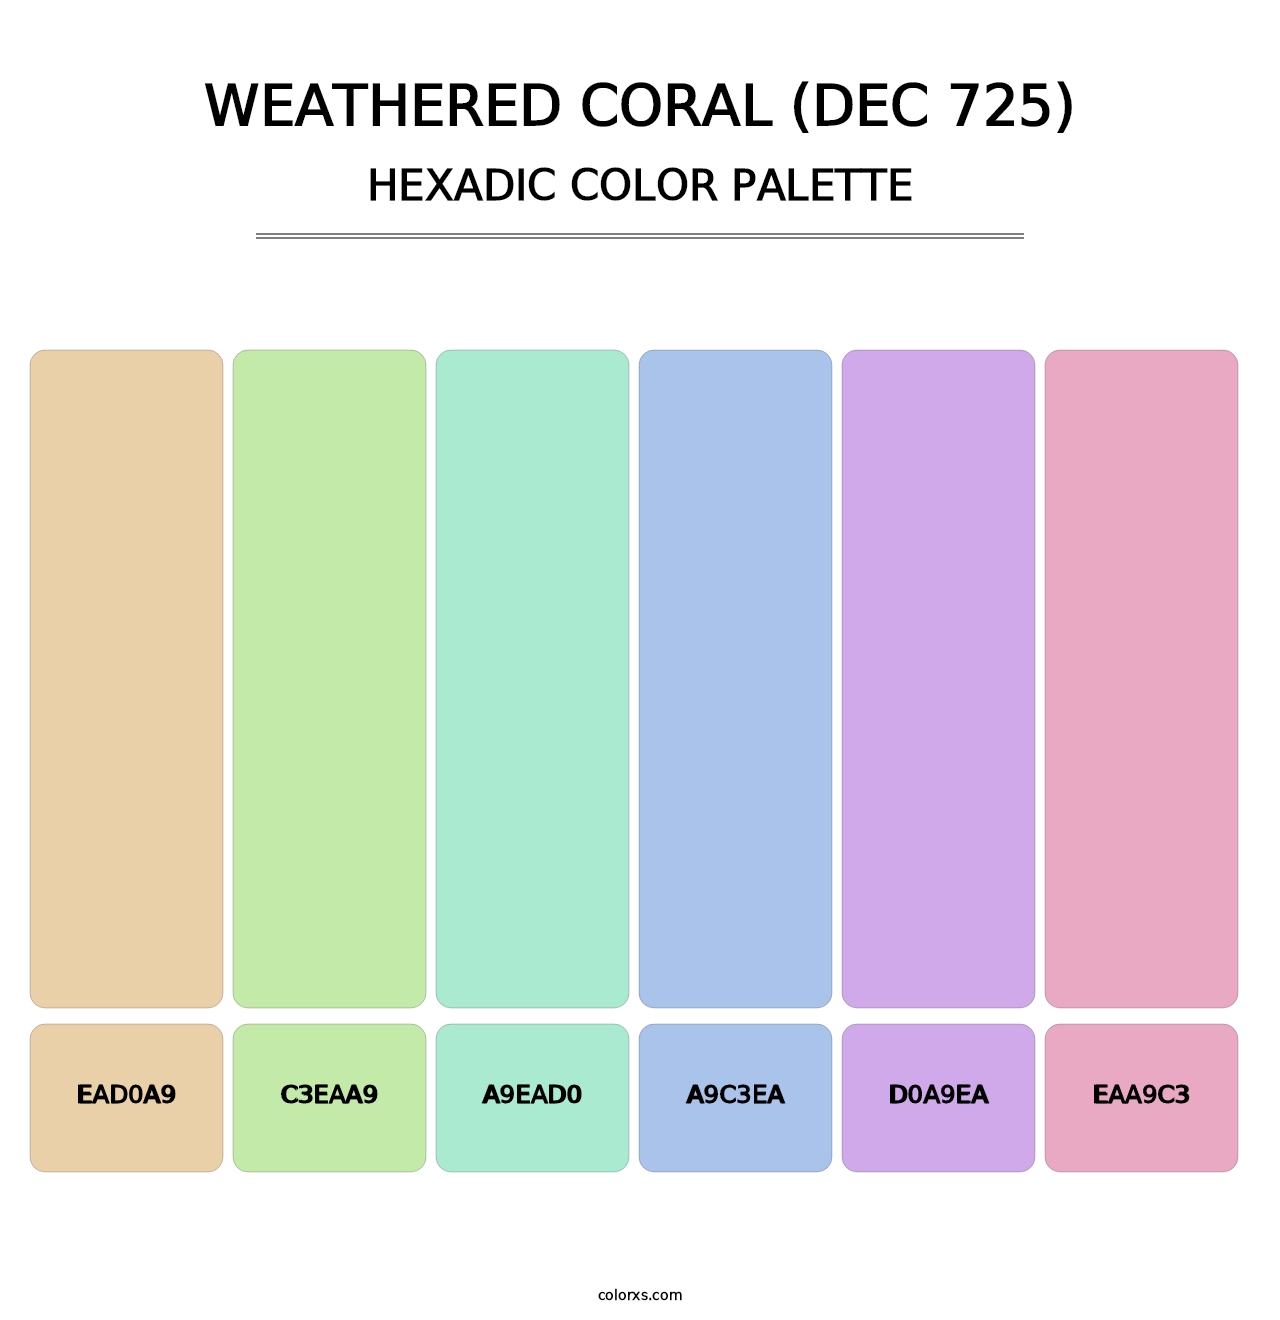 Weathered Coral (DEC 725) - Hexadic Color Palette